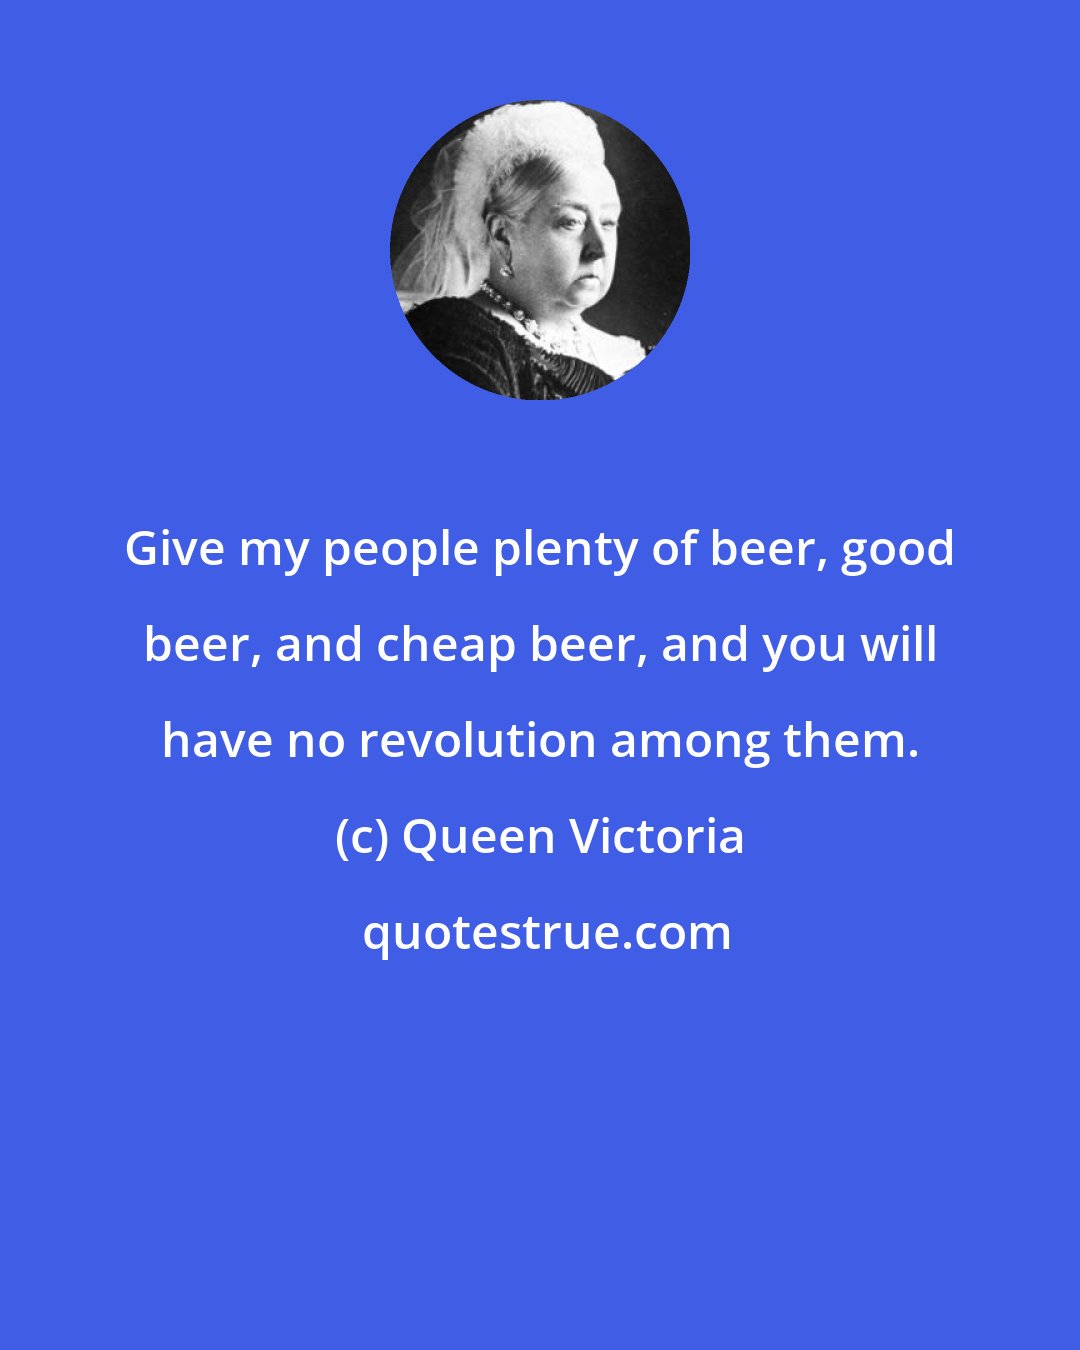 Queen Victoria: Give my people plenty of beer, good beer, and cheap beer, and you will have no revolution among them.